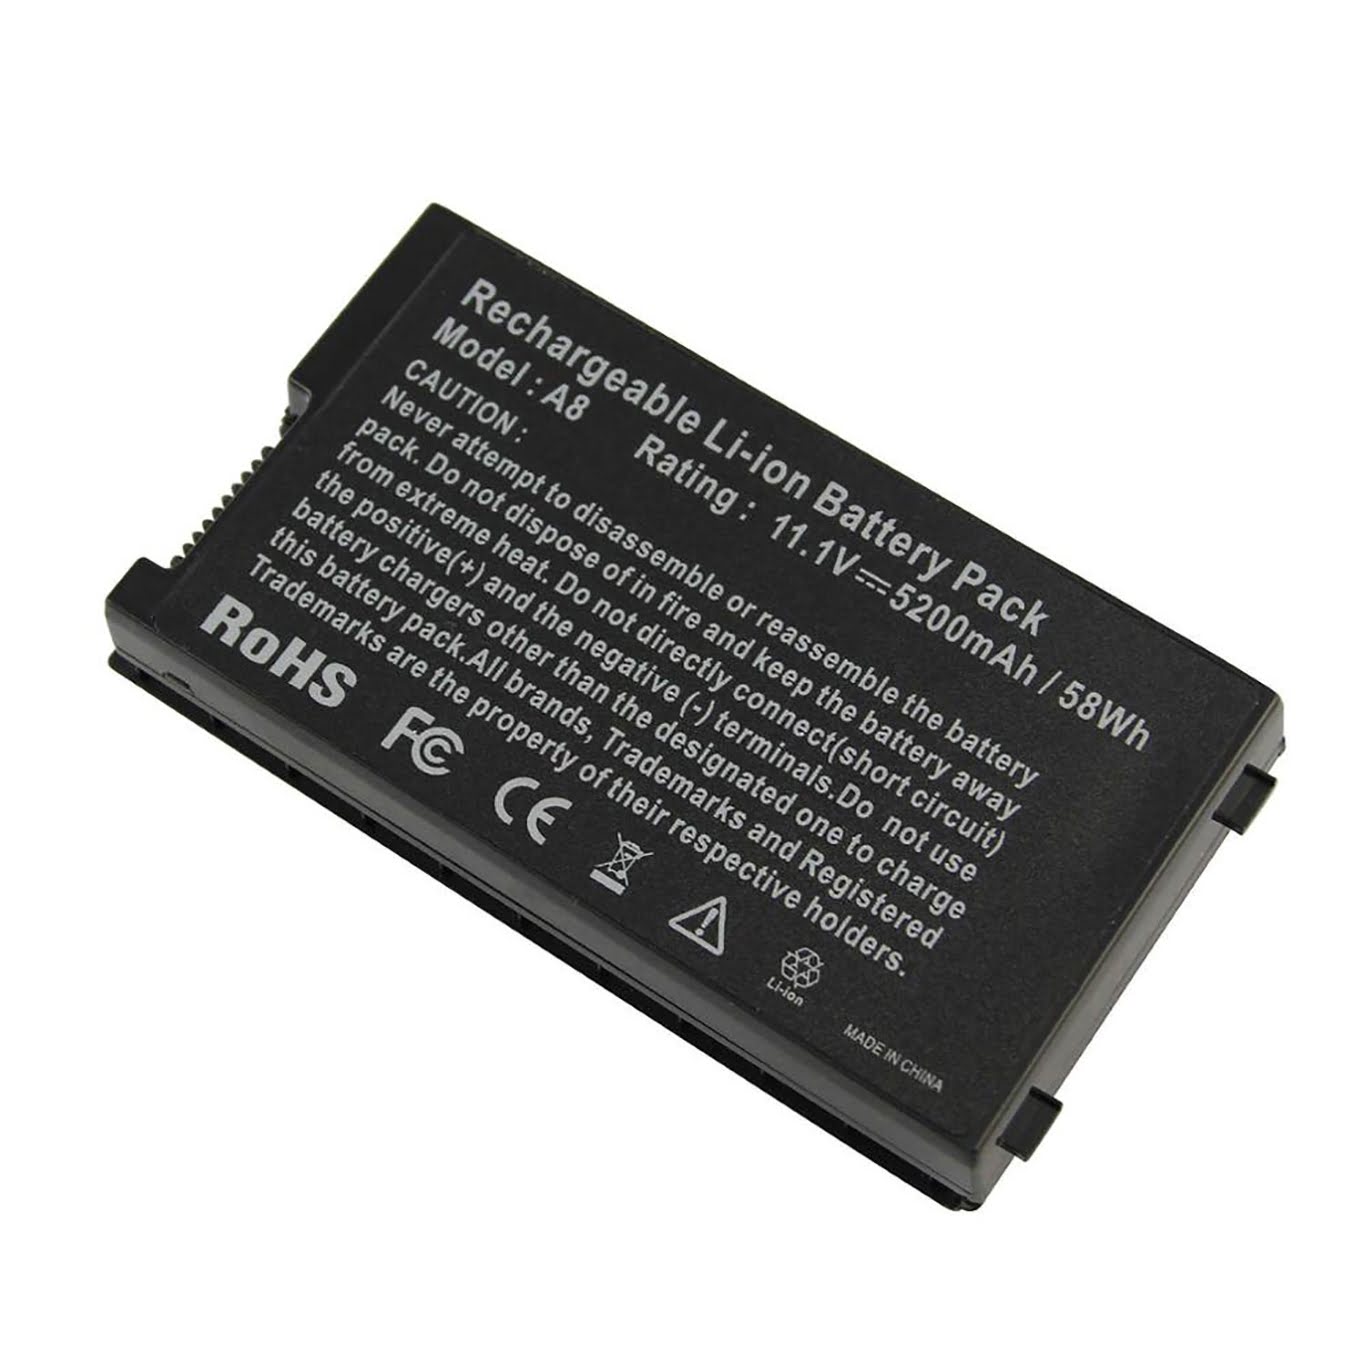 15G10N345800, 15G10N345800 DPC replacement Laptop Battery for Asus A72DY, A72JT, 11.1V, 6 cells, 4400mah/49wh